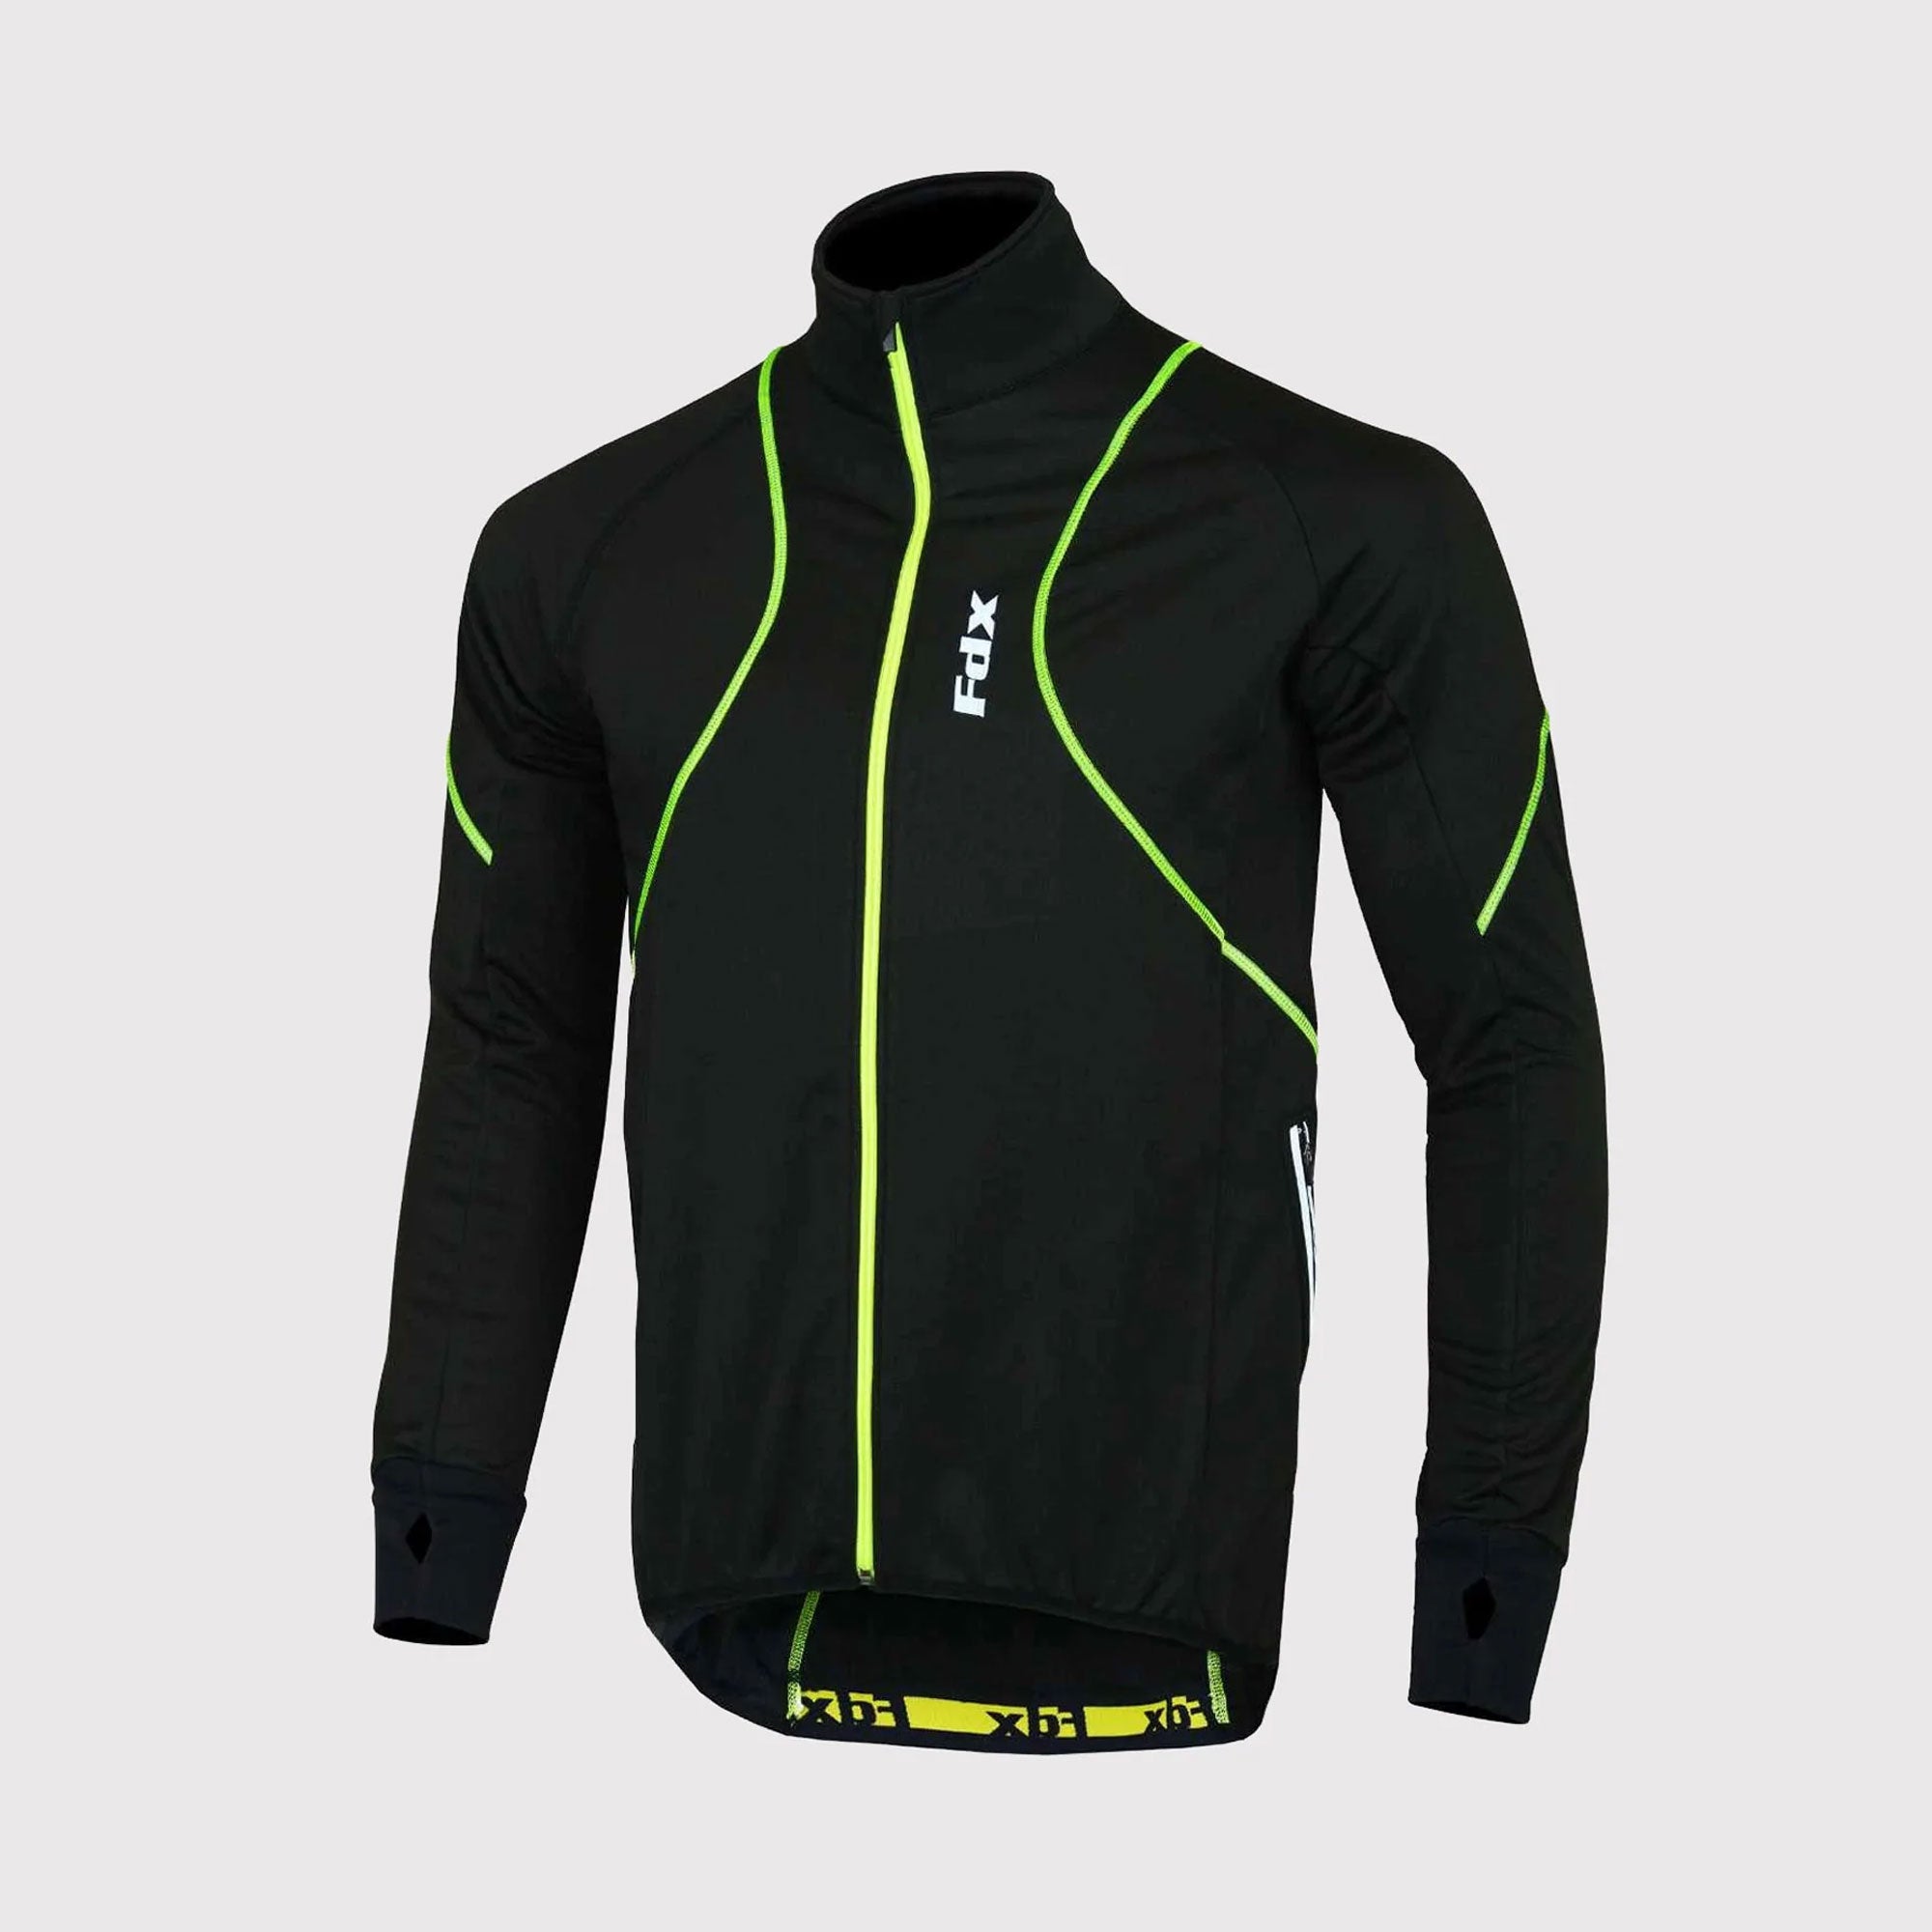 Fdx Mens Black & Green Cycling Jacket for Winter Thermal Casual Softshell Clothing Lightweight, Windproof, Waterproof & Pockets - Gustt